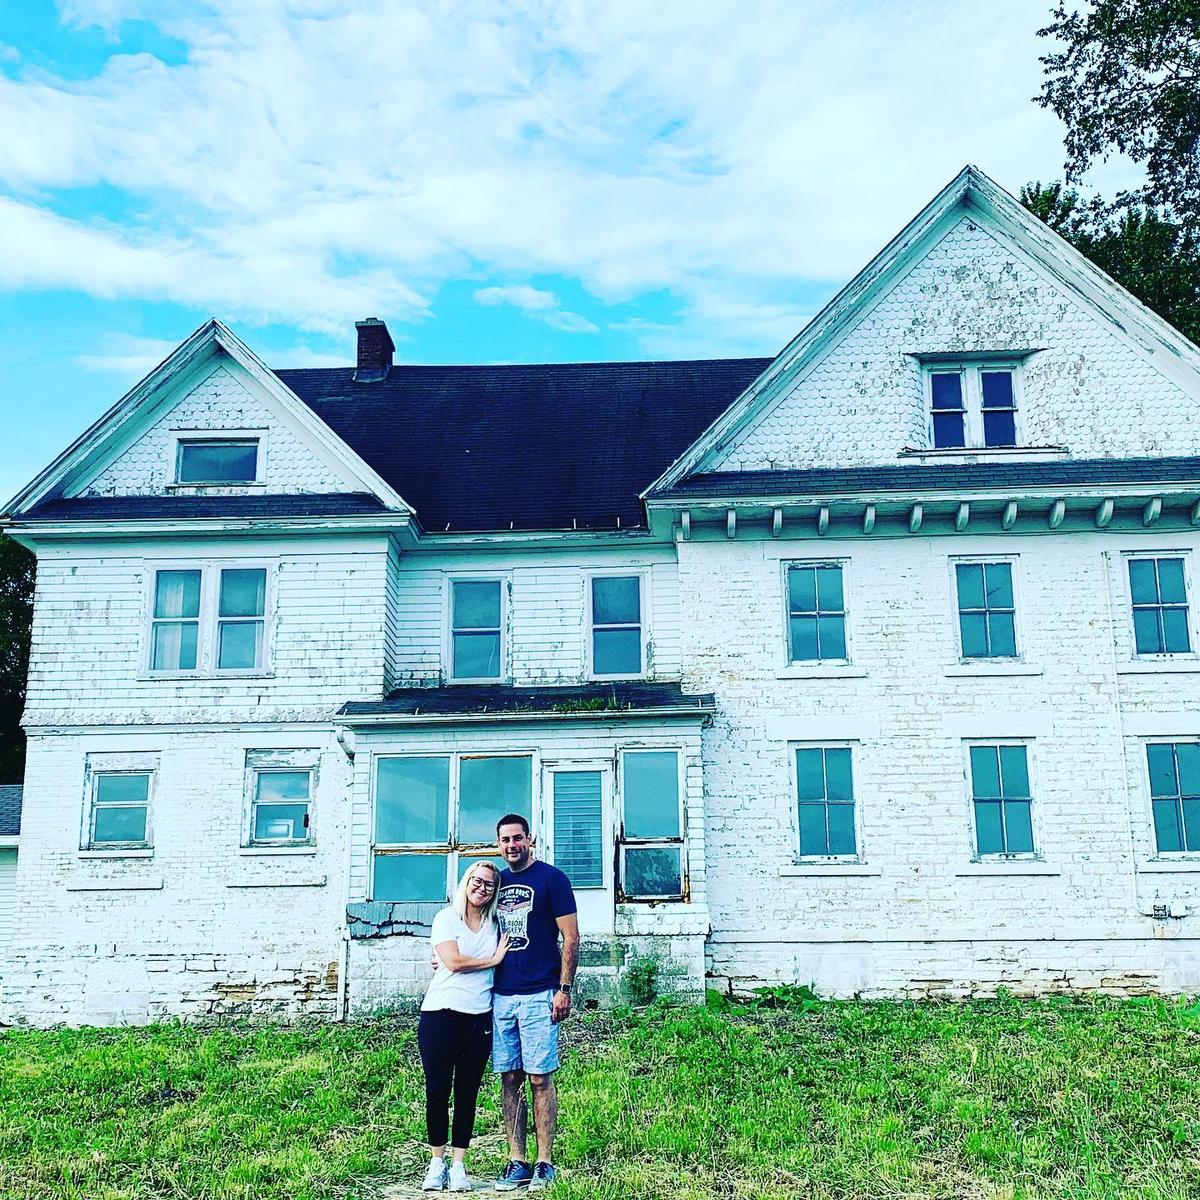 Mr. and Mrs. Grandchamp in front of the house before the transformation. (Courtesy of <a href="https://www.instagram.com/grandchampinteriors/">Megan Grandchamp</a>)